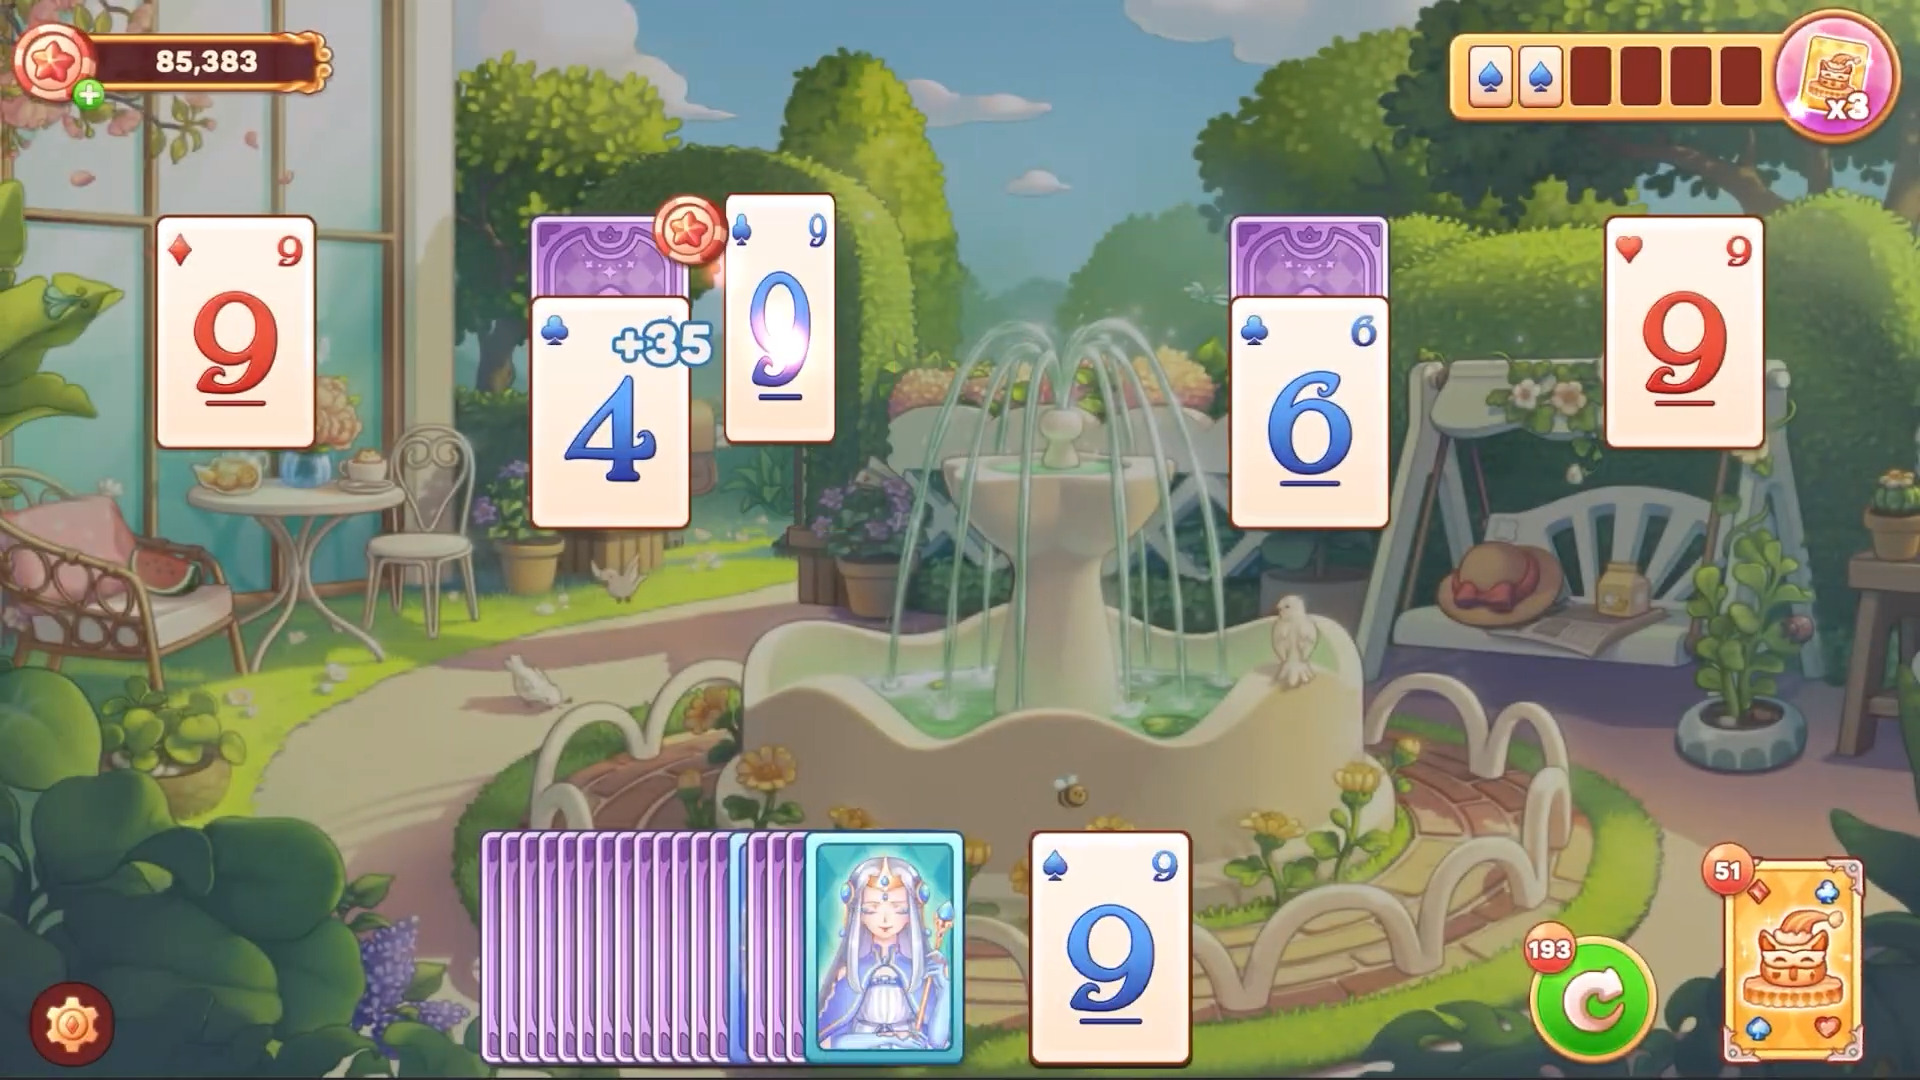 Gameplay of the Kawaii Theater Solitaire for Android phone or tablet.